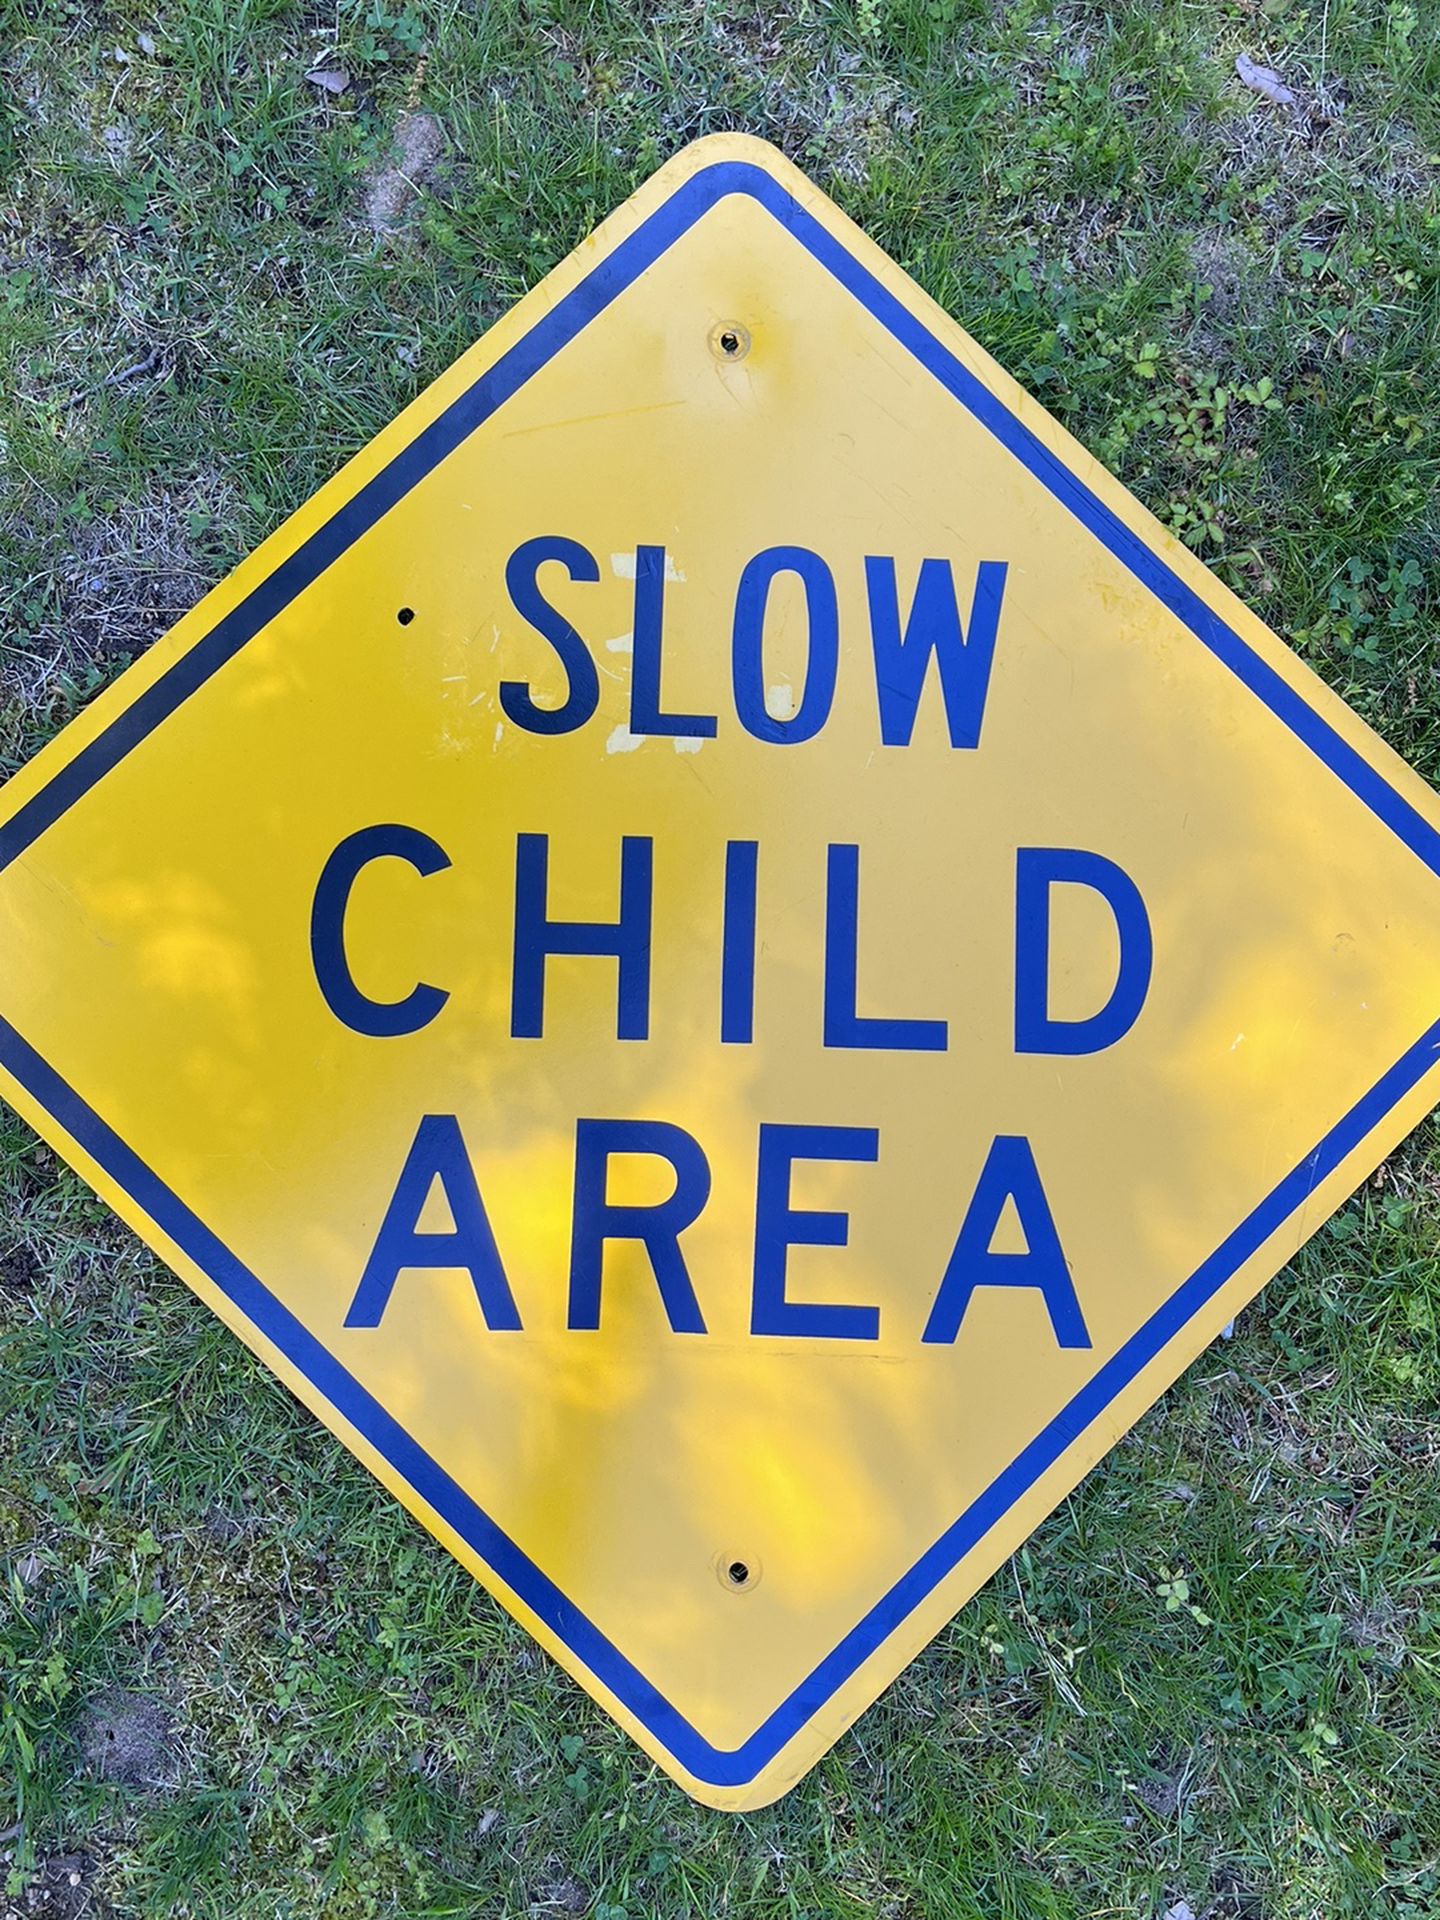 Old Vintage Discarded Metal Street Sign Diamond Slow Child Area Yellow